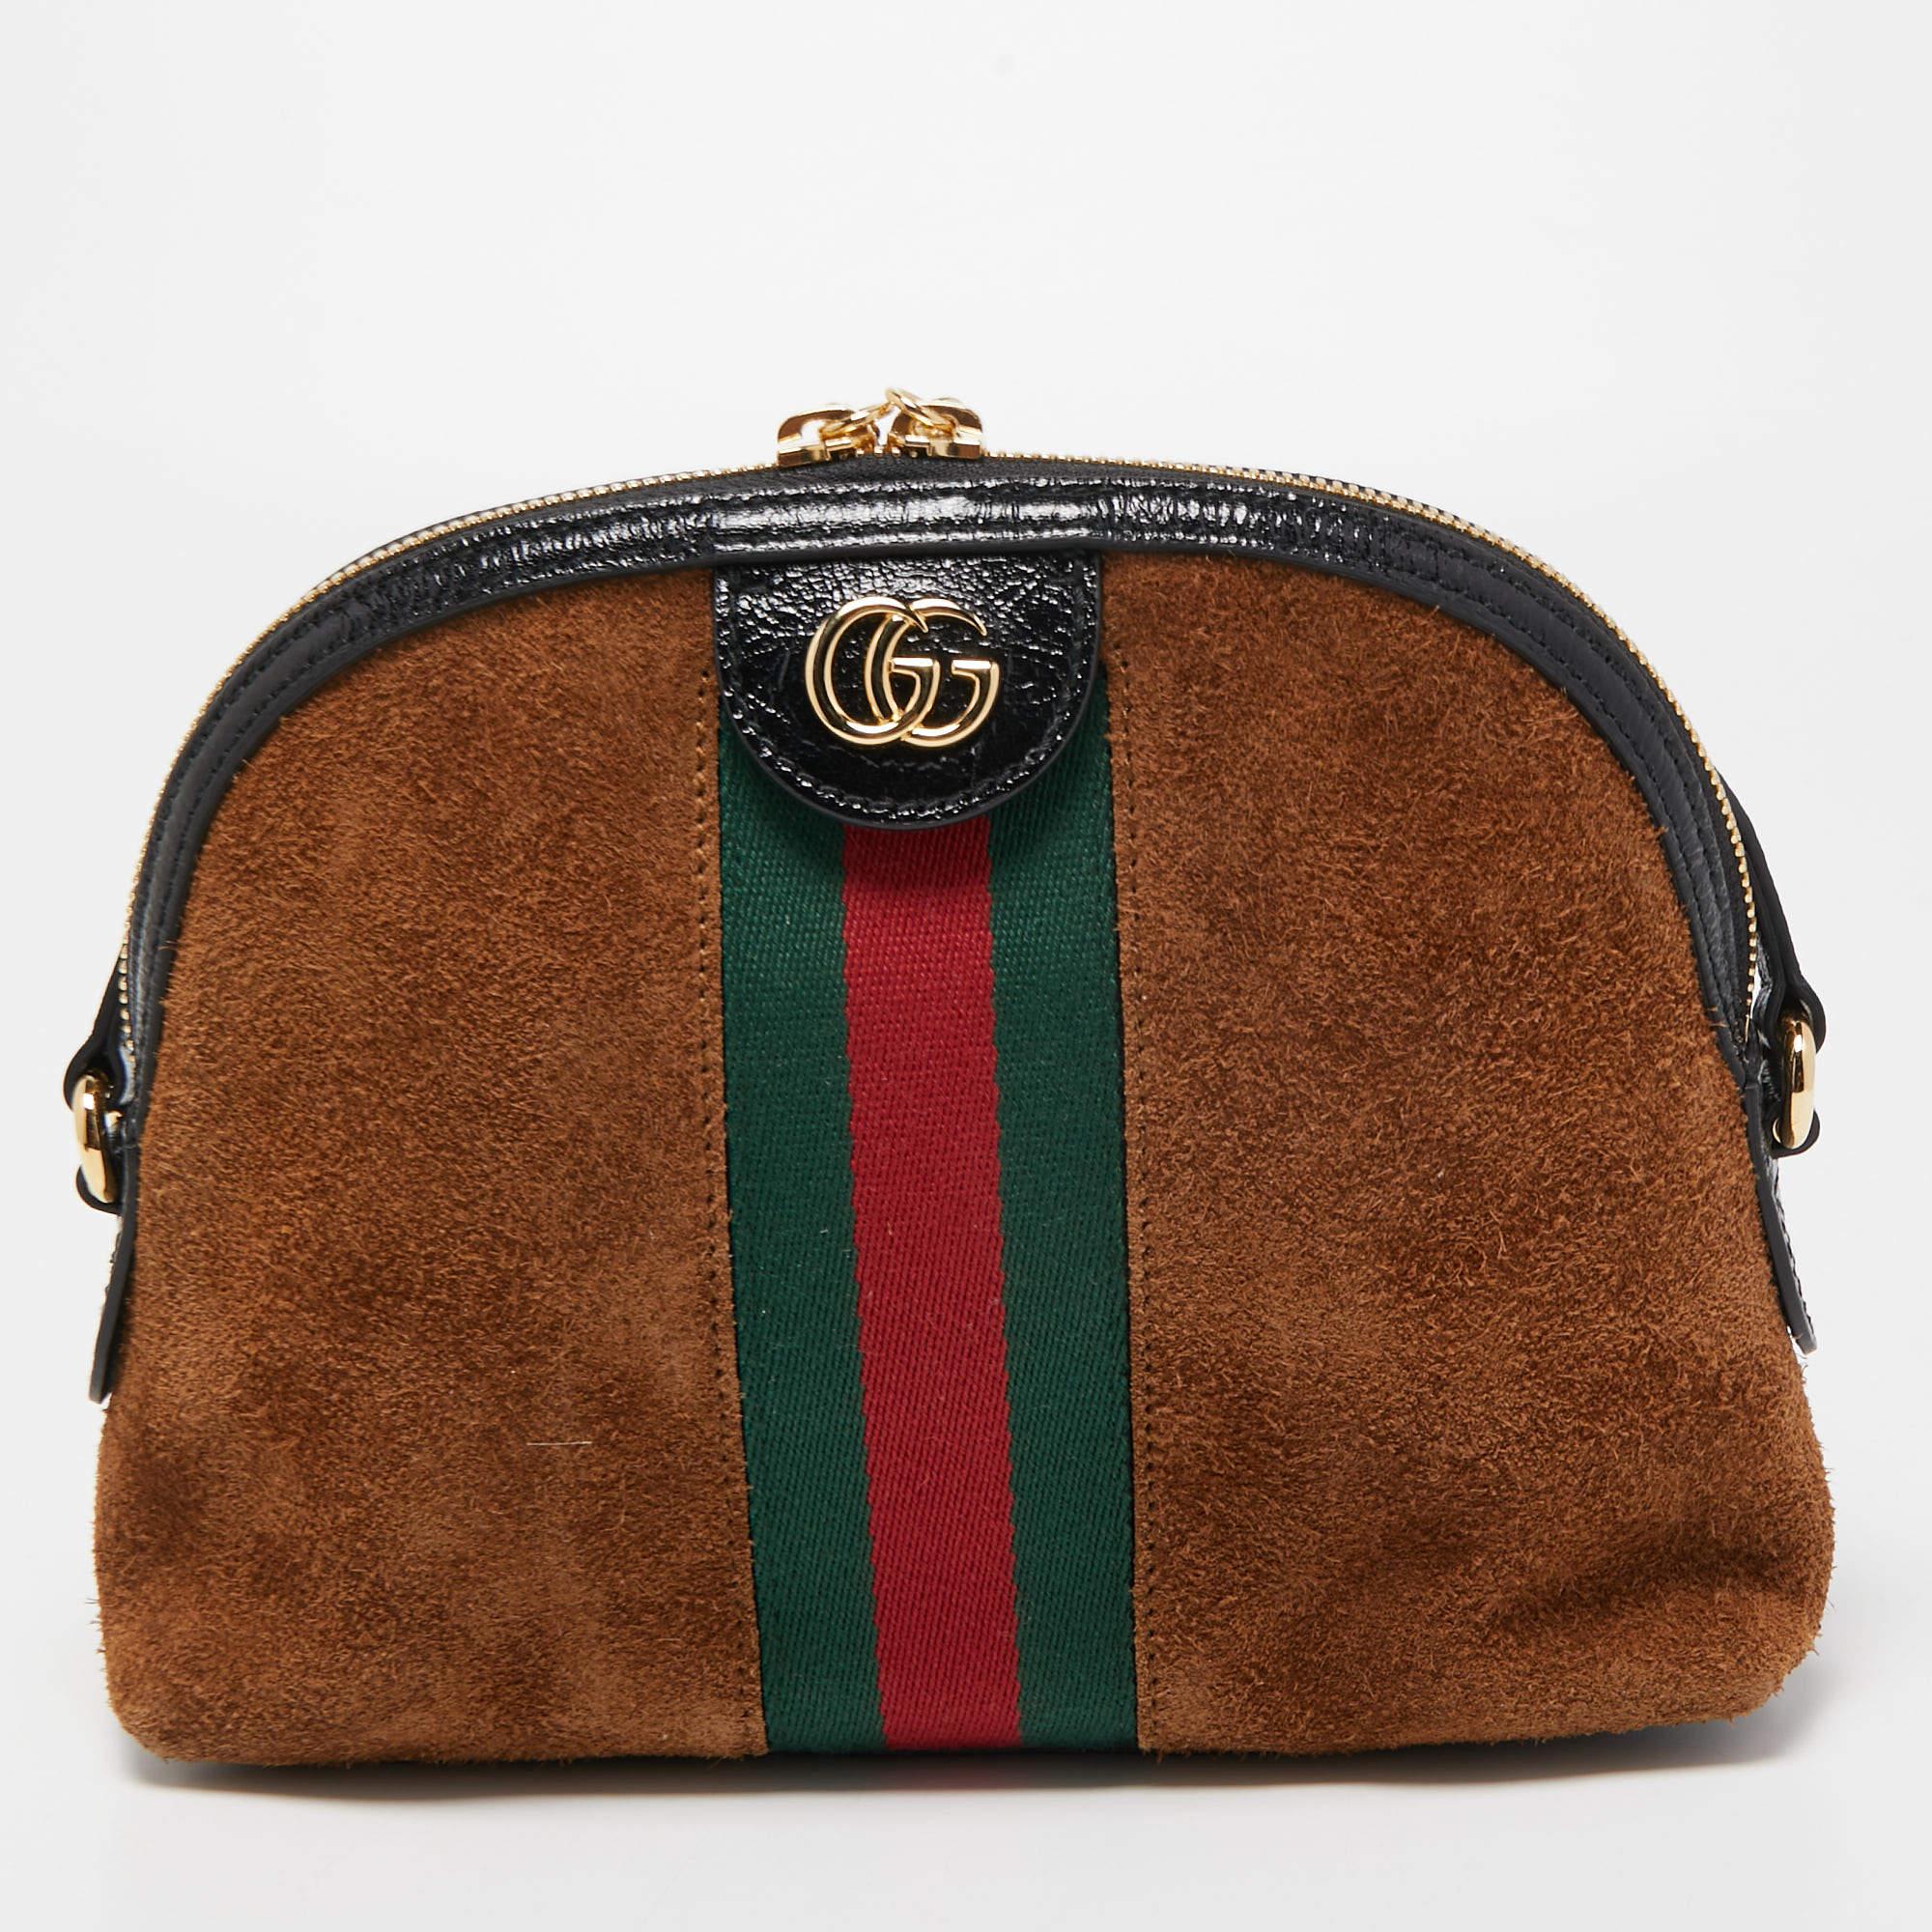 Women's Gucci Brown Suede and Leather Small Web Ophidia GG Shoulder Bag